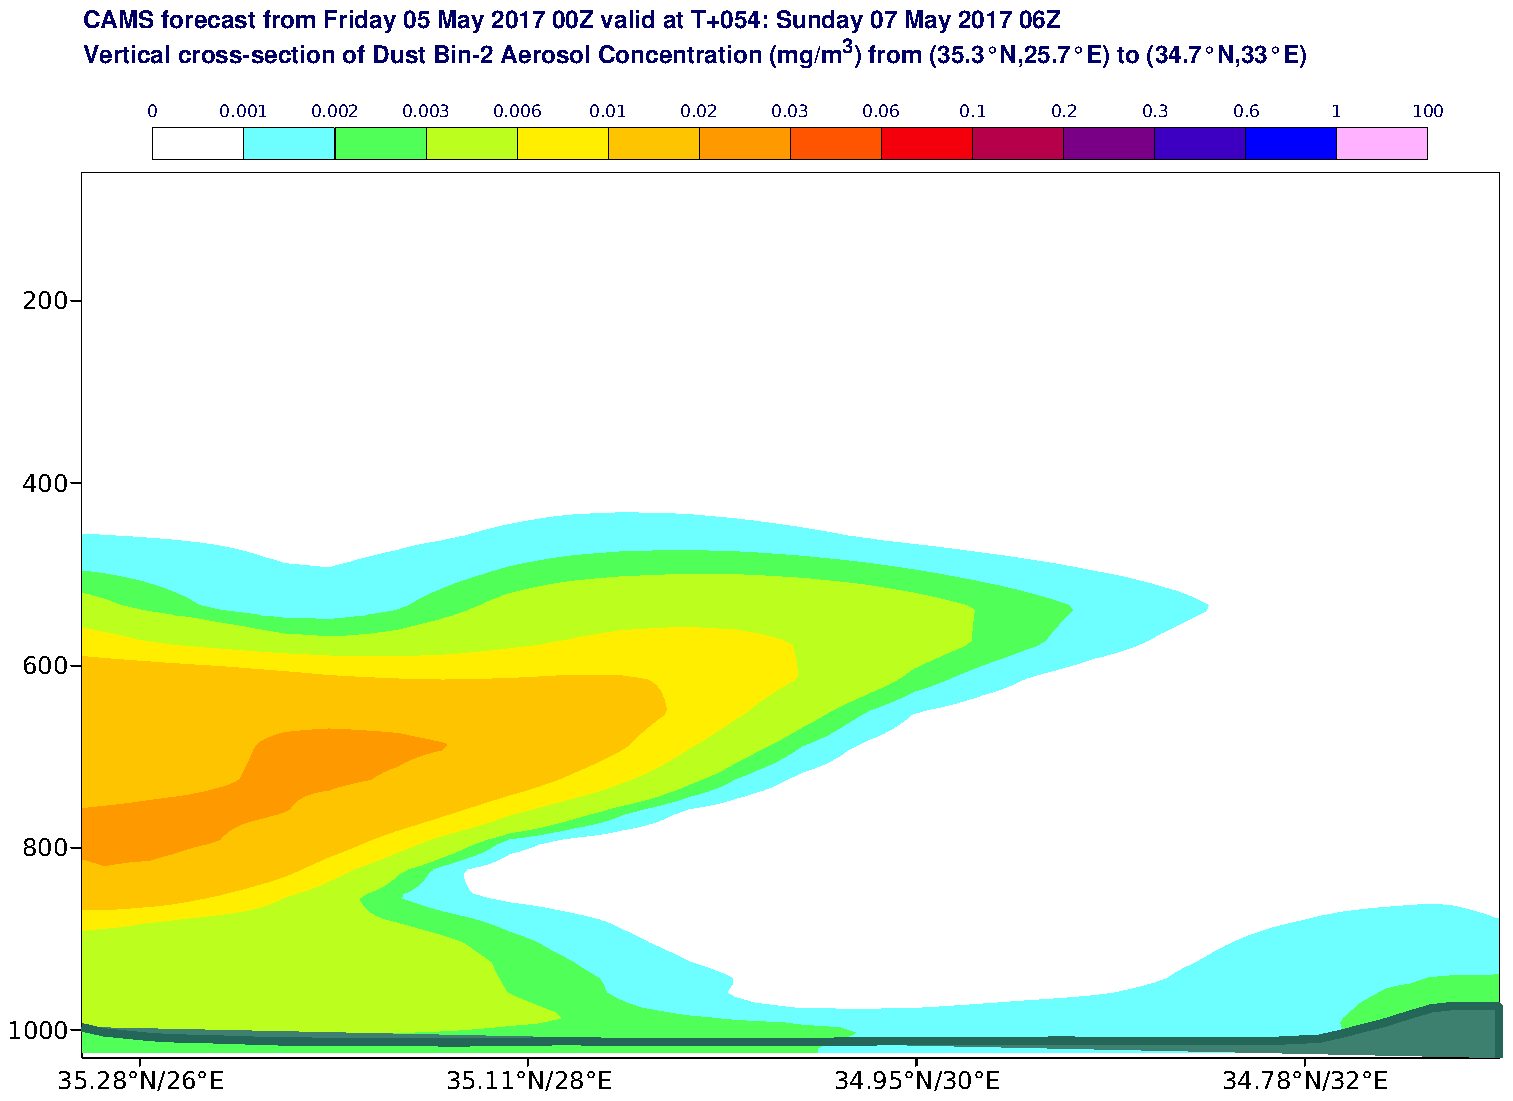 Vertical cross-section of Dust Bin-2 Aerosol Concentration (mg/m3) valid at T54 - 2017-05-07 06:00